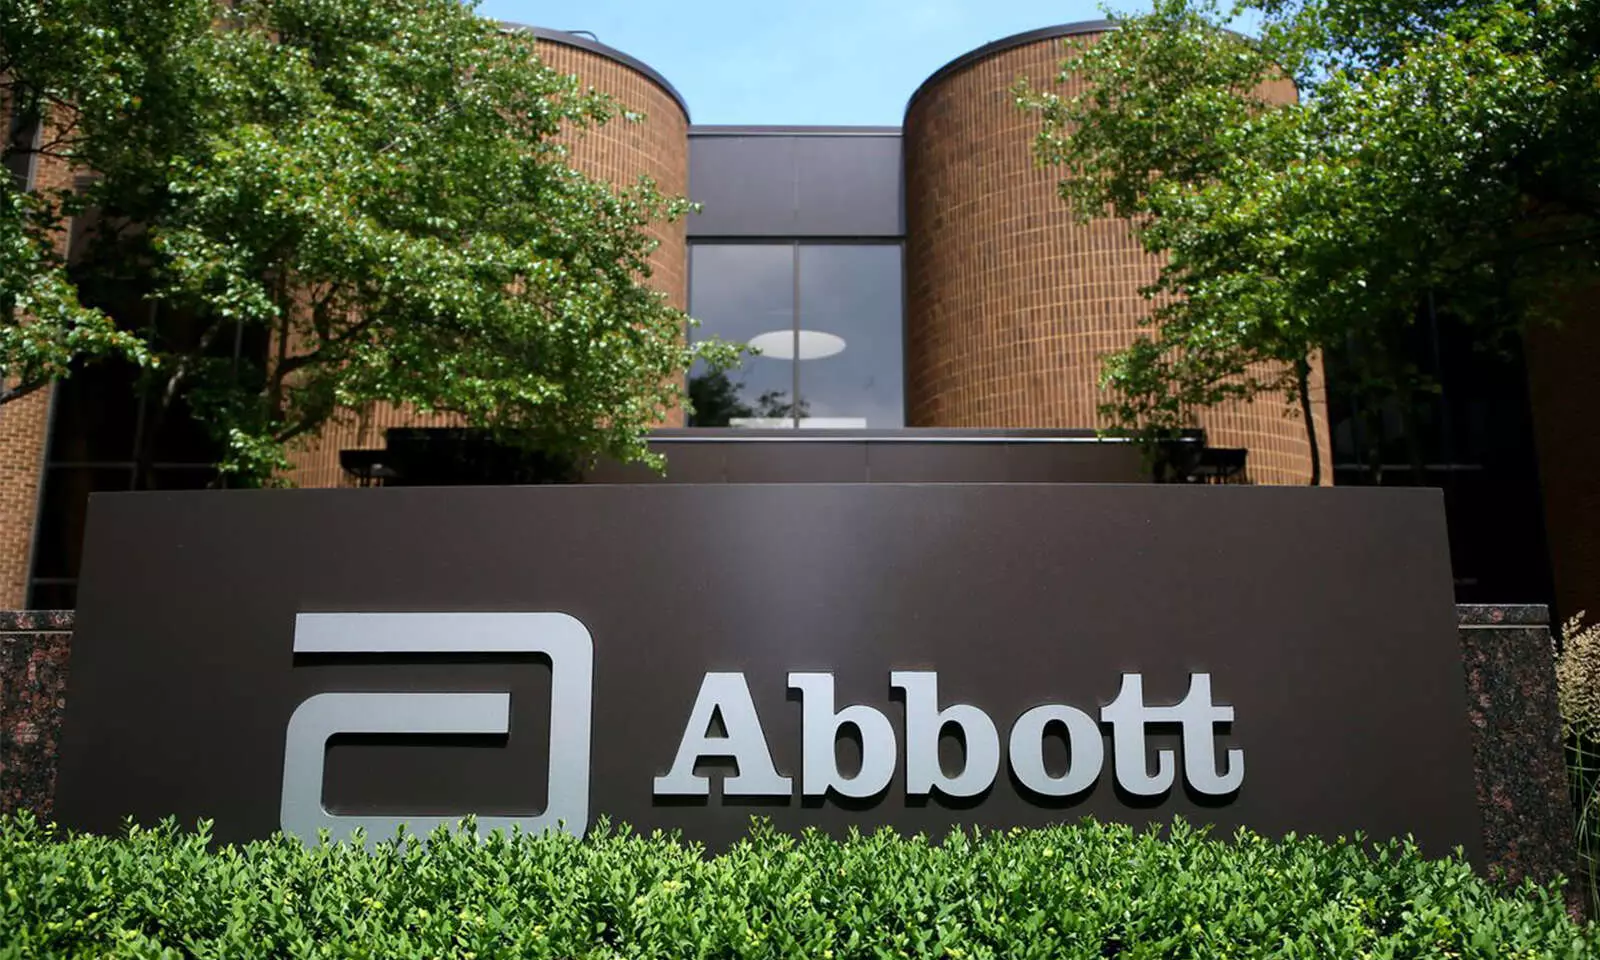 USFDA investigates death of another infant given Abbott formula: Bloomberg